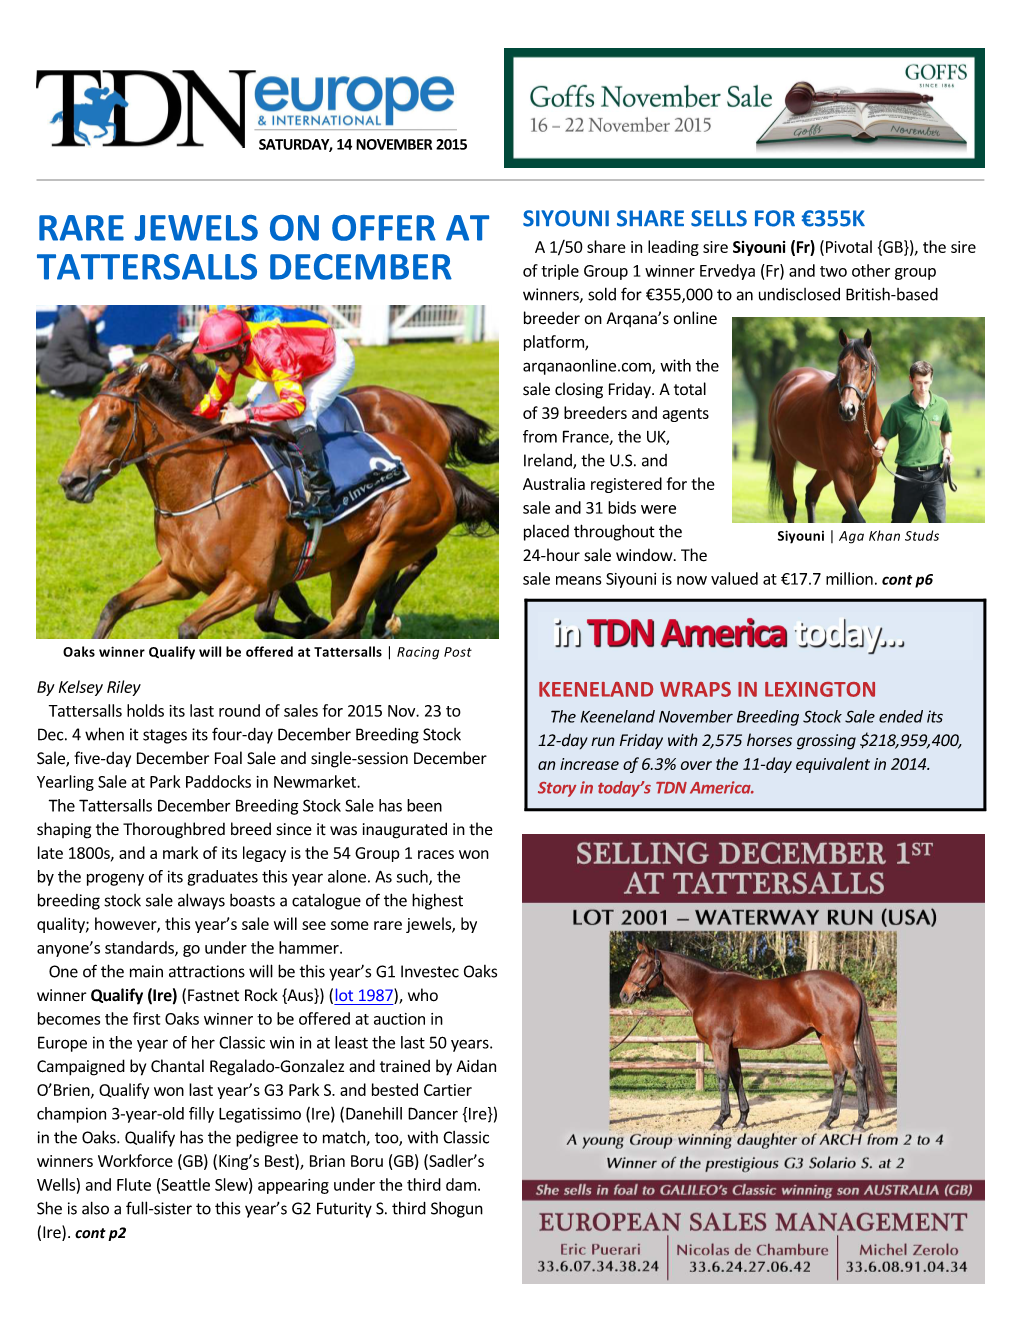 Rare Jewels on Offer at Tattersalls December Cont